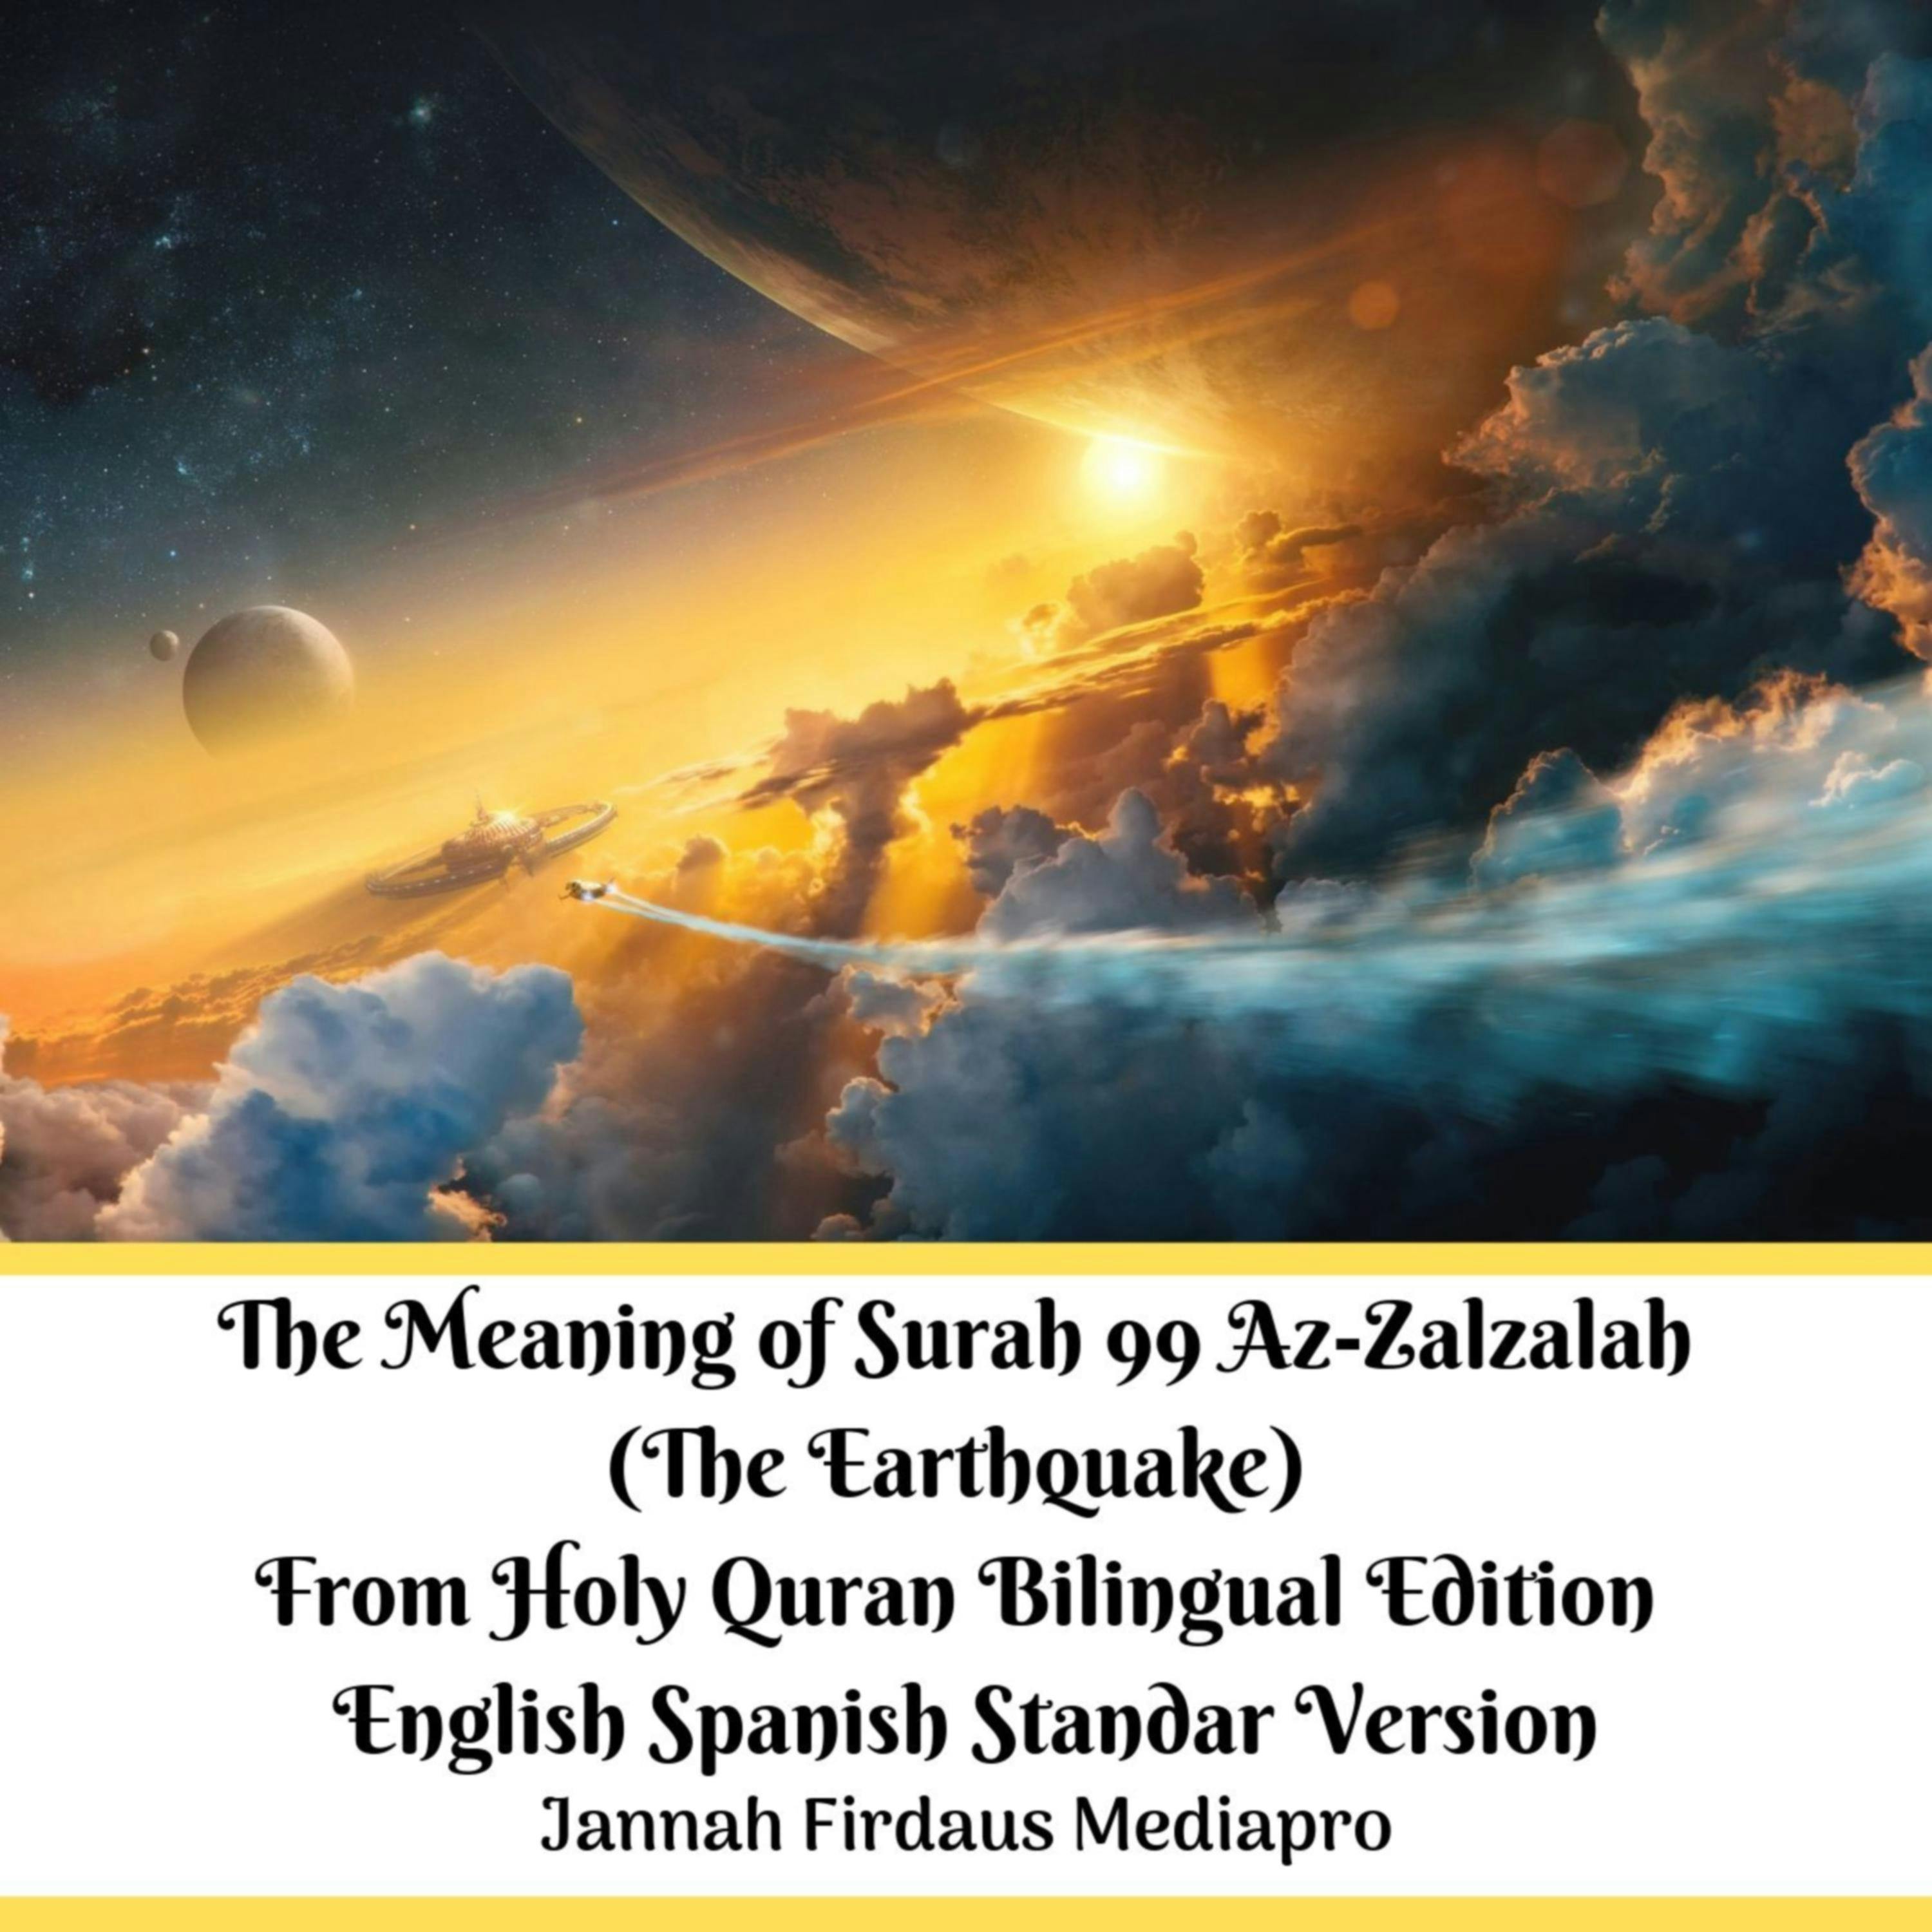 The Meaning of Surah 99 Az-Zalzalah (The Earthquake) From Holy Quran Bilingual Edition English Spanish Standar Version - undefined